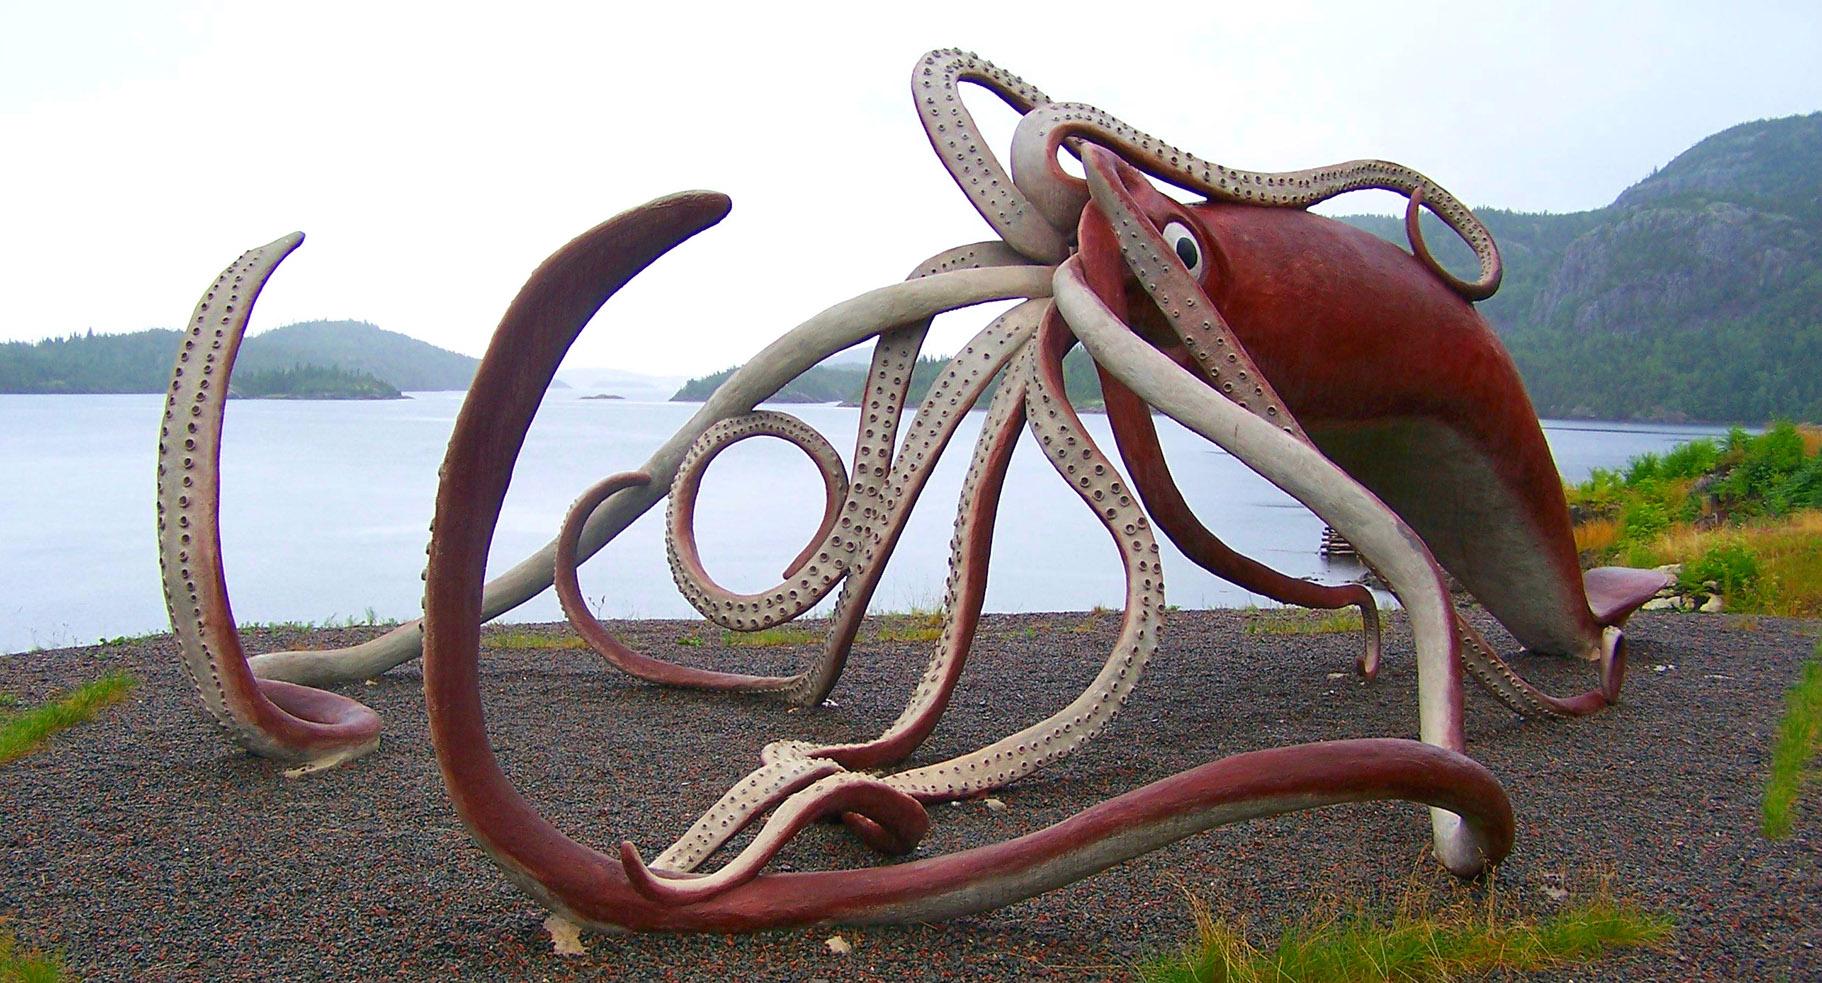 A model of a giant squid in Glover’s Harbour, Newfoundland. (Robert Hiscock / Flickr)